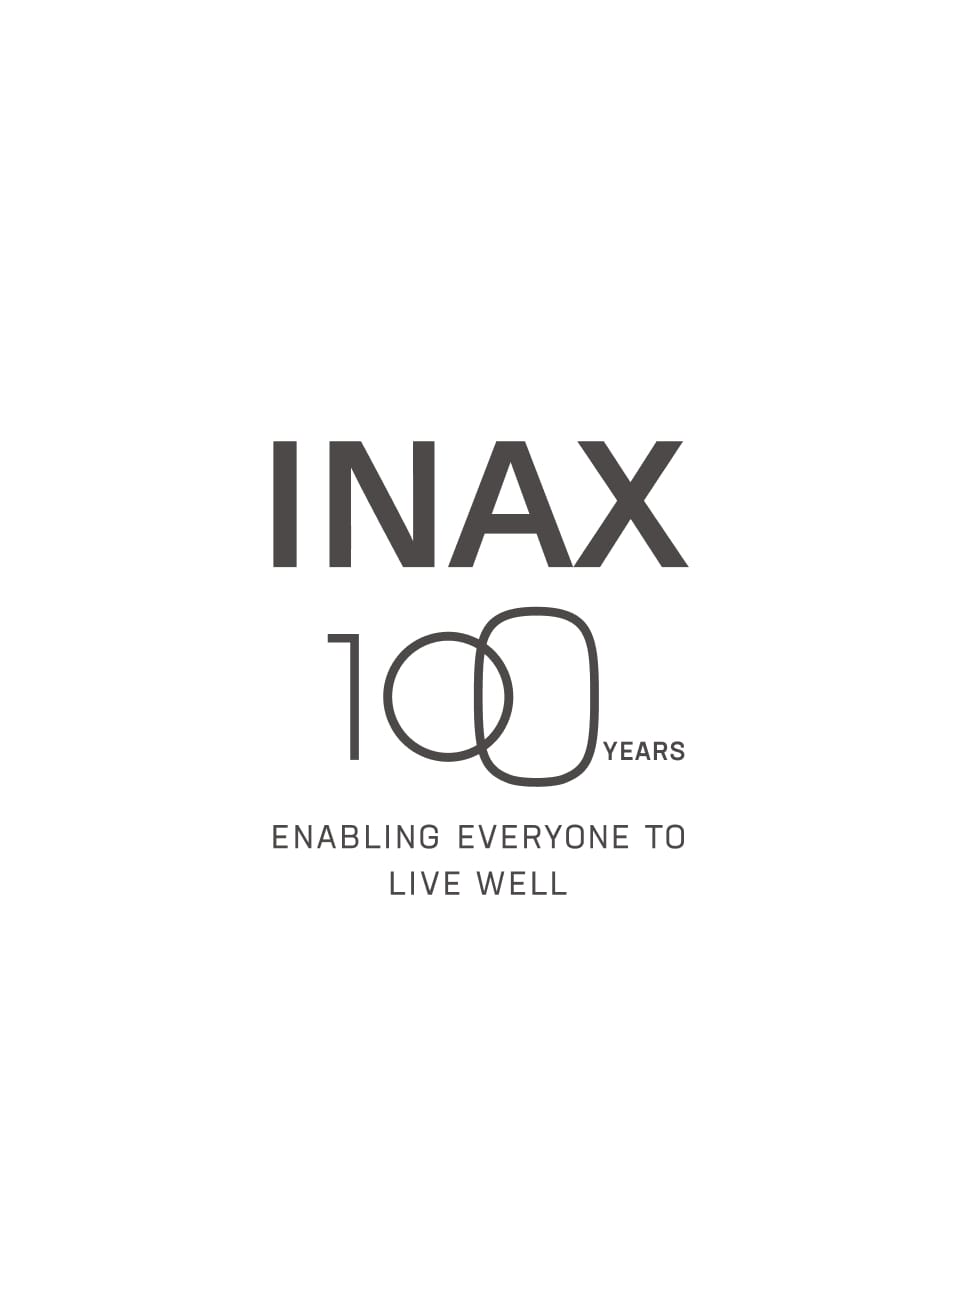 Celebrated 100 years of INAX.